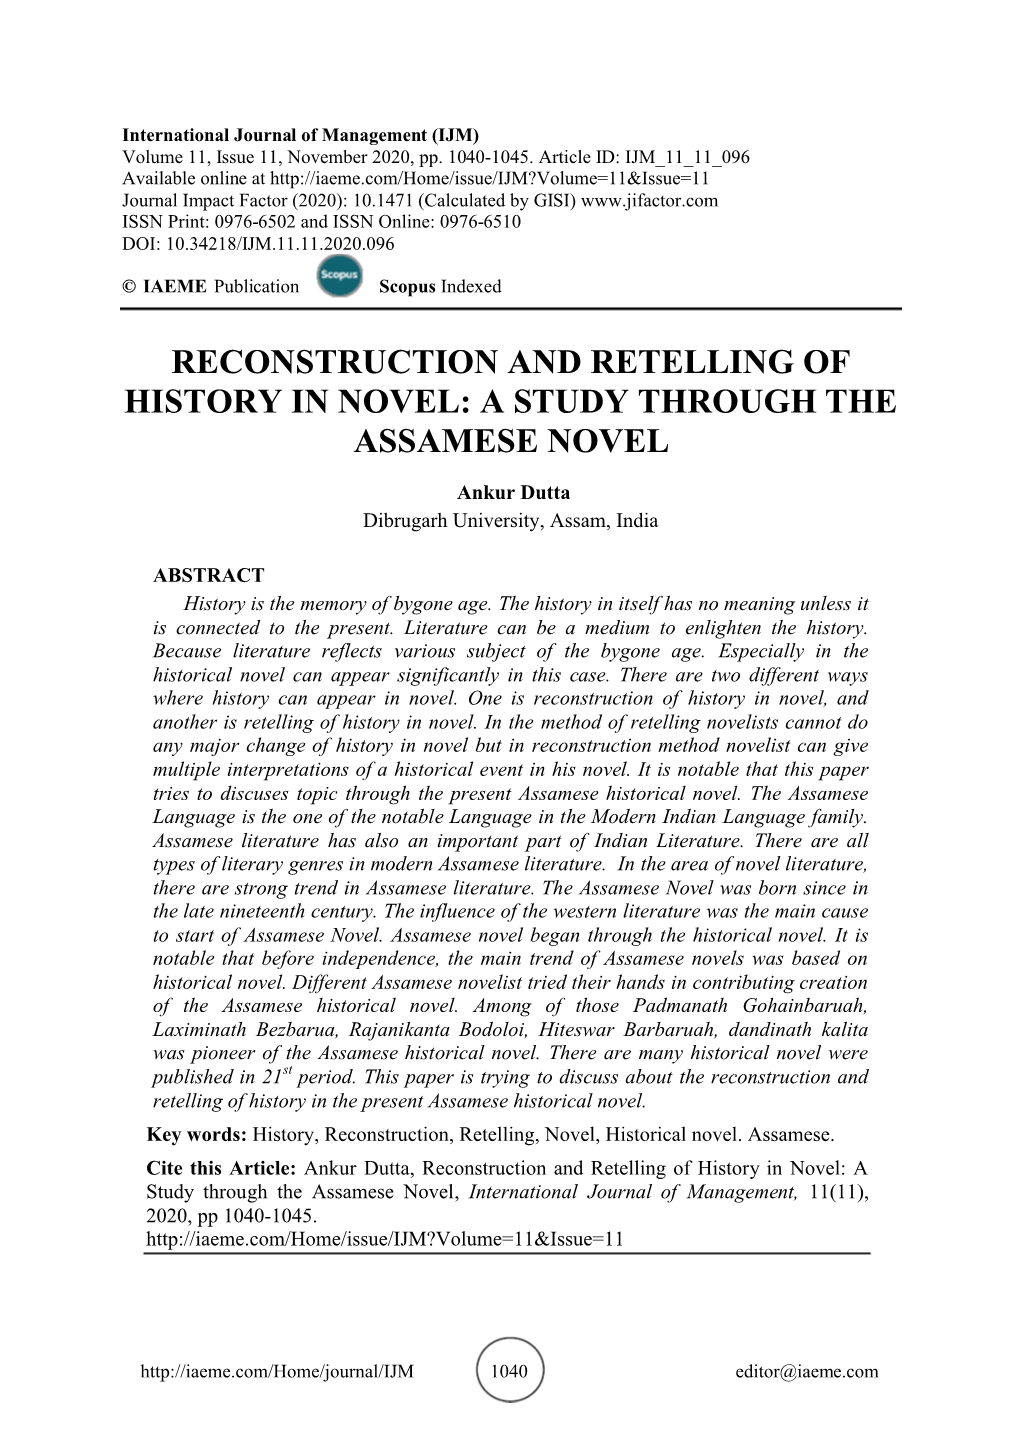 Reconstruction and R Ling of Etel History in Novel: a Study Through The